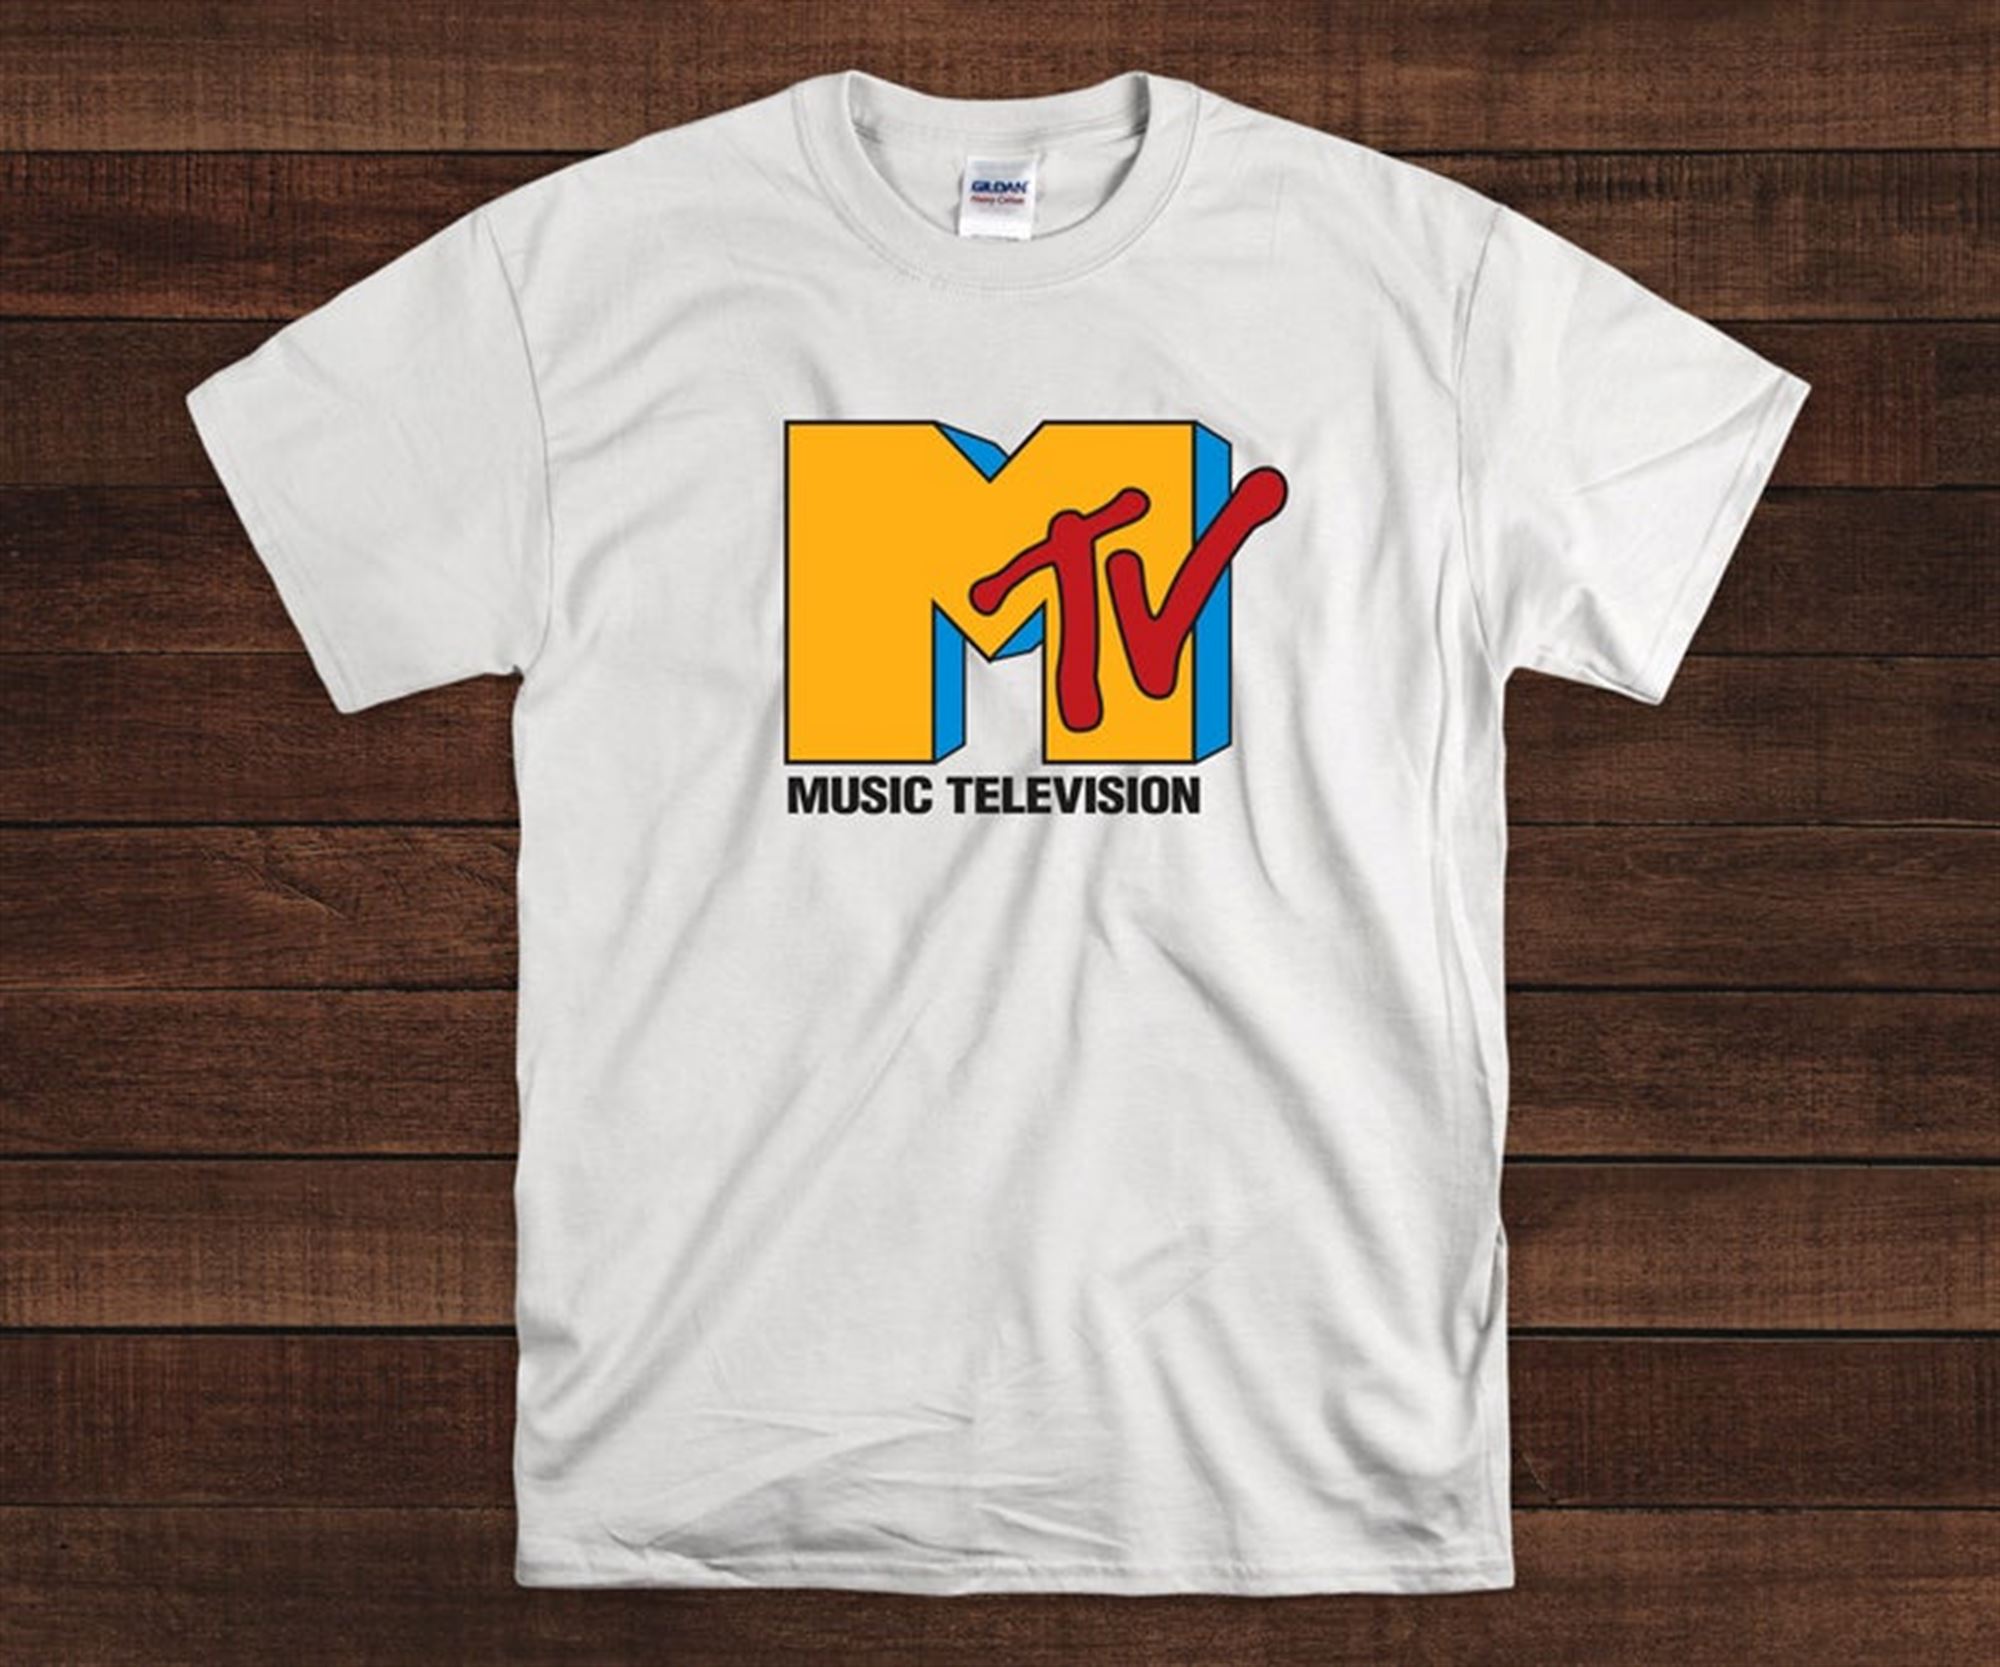 Mtv Turns 40 Year Music T-shirt Full Size Up To 5xl